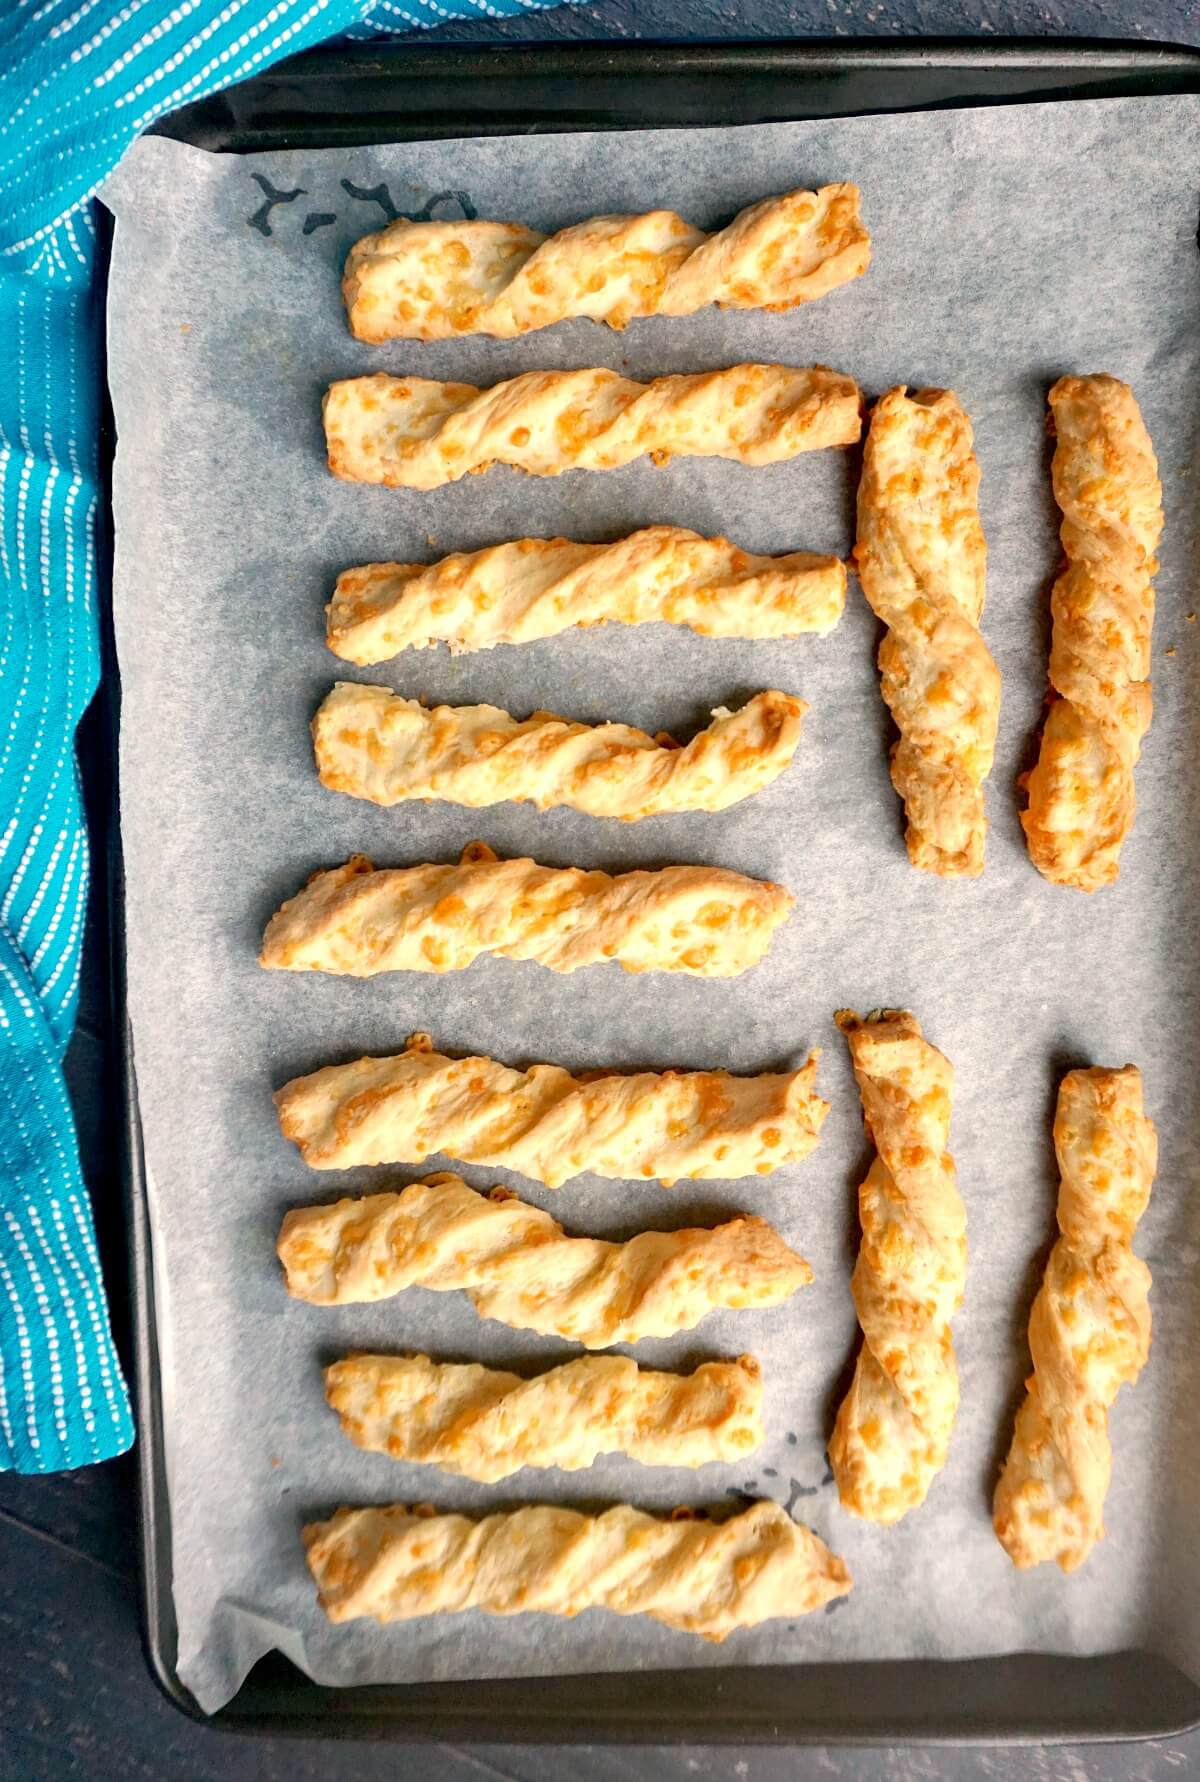 Overhead shoot of a baking tray with 13 cheese twists.